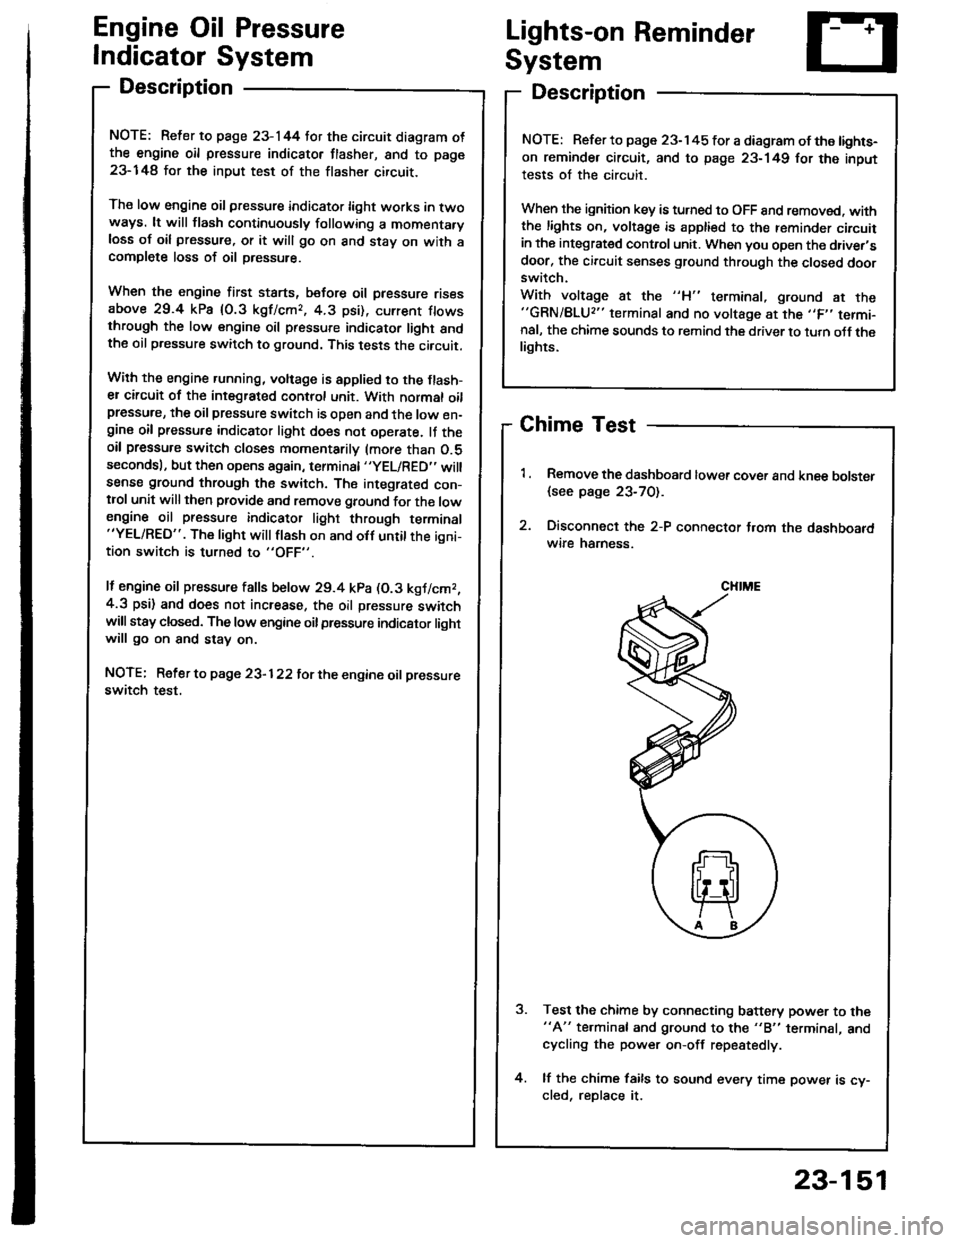 ACURA INTEGRA 1994  Service Repair Manual Engine Oil Pressure
Indicator System
Description
NOTE: Reter to page 23-144 tor the circuit diagram otthe engine oil pressure indicator flasher, snd to page
23-148 lor the input test of the flasher ci